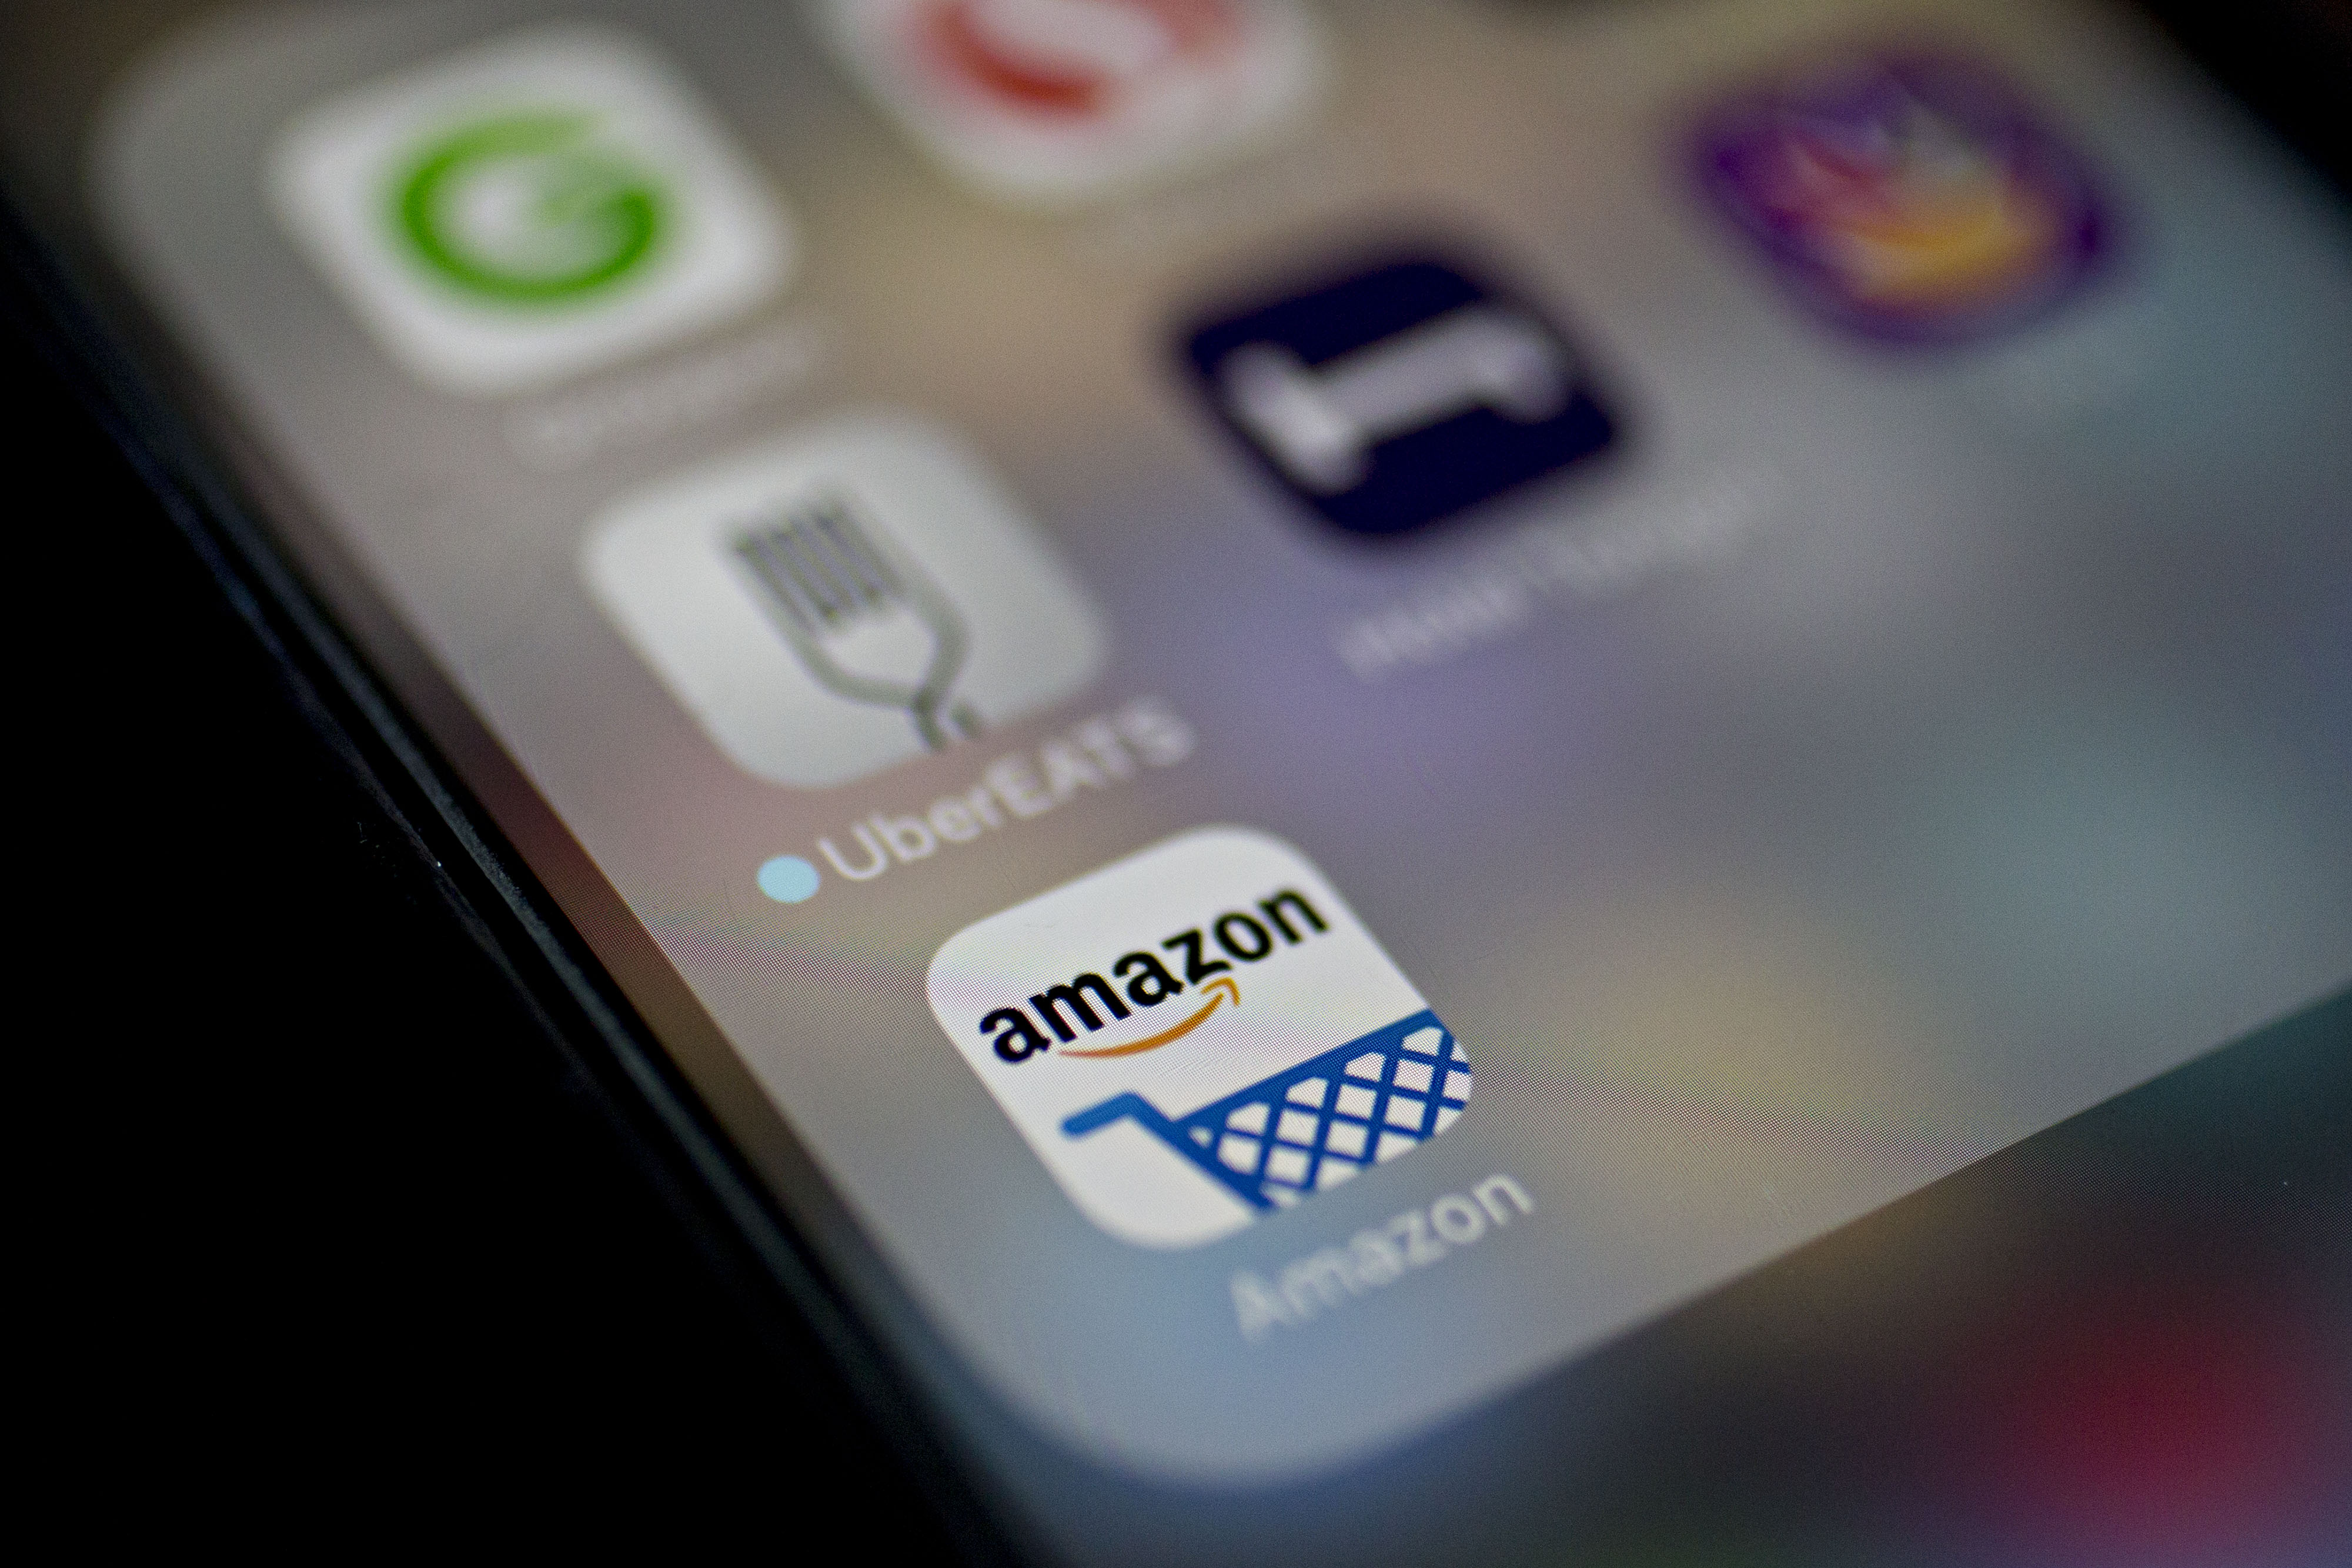 The Amazon.com Inc. application icon is displayed on an Apple Inc. iPhone in Washington, D.C., U.S., on Monday, Dec. 5, 2016. (Bloomberg&mdash;Bloomberg via Getty Images)